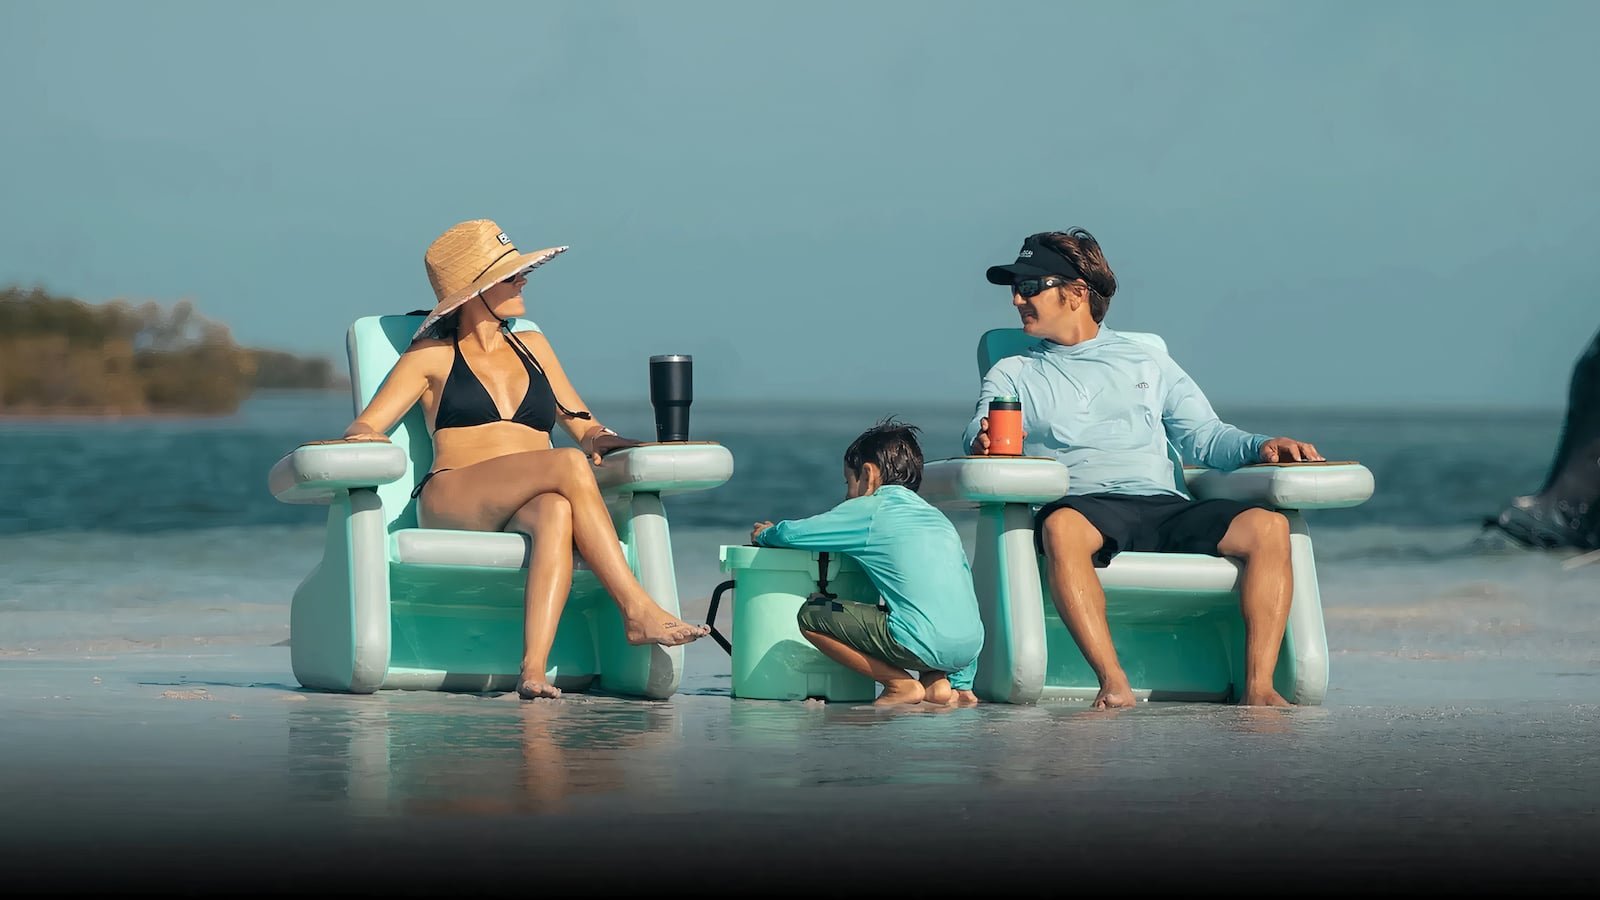 BOTE AeroRondak Chair has a traditional Adirondack chair design and it’s inflatable